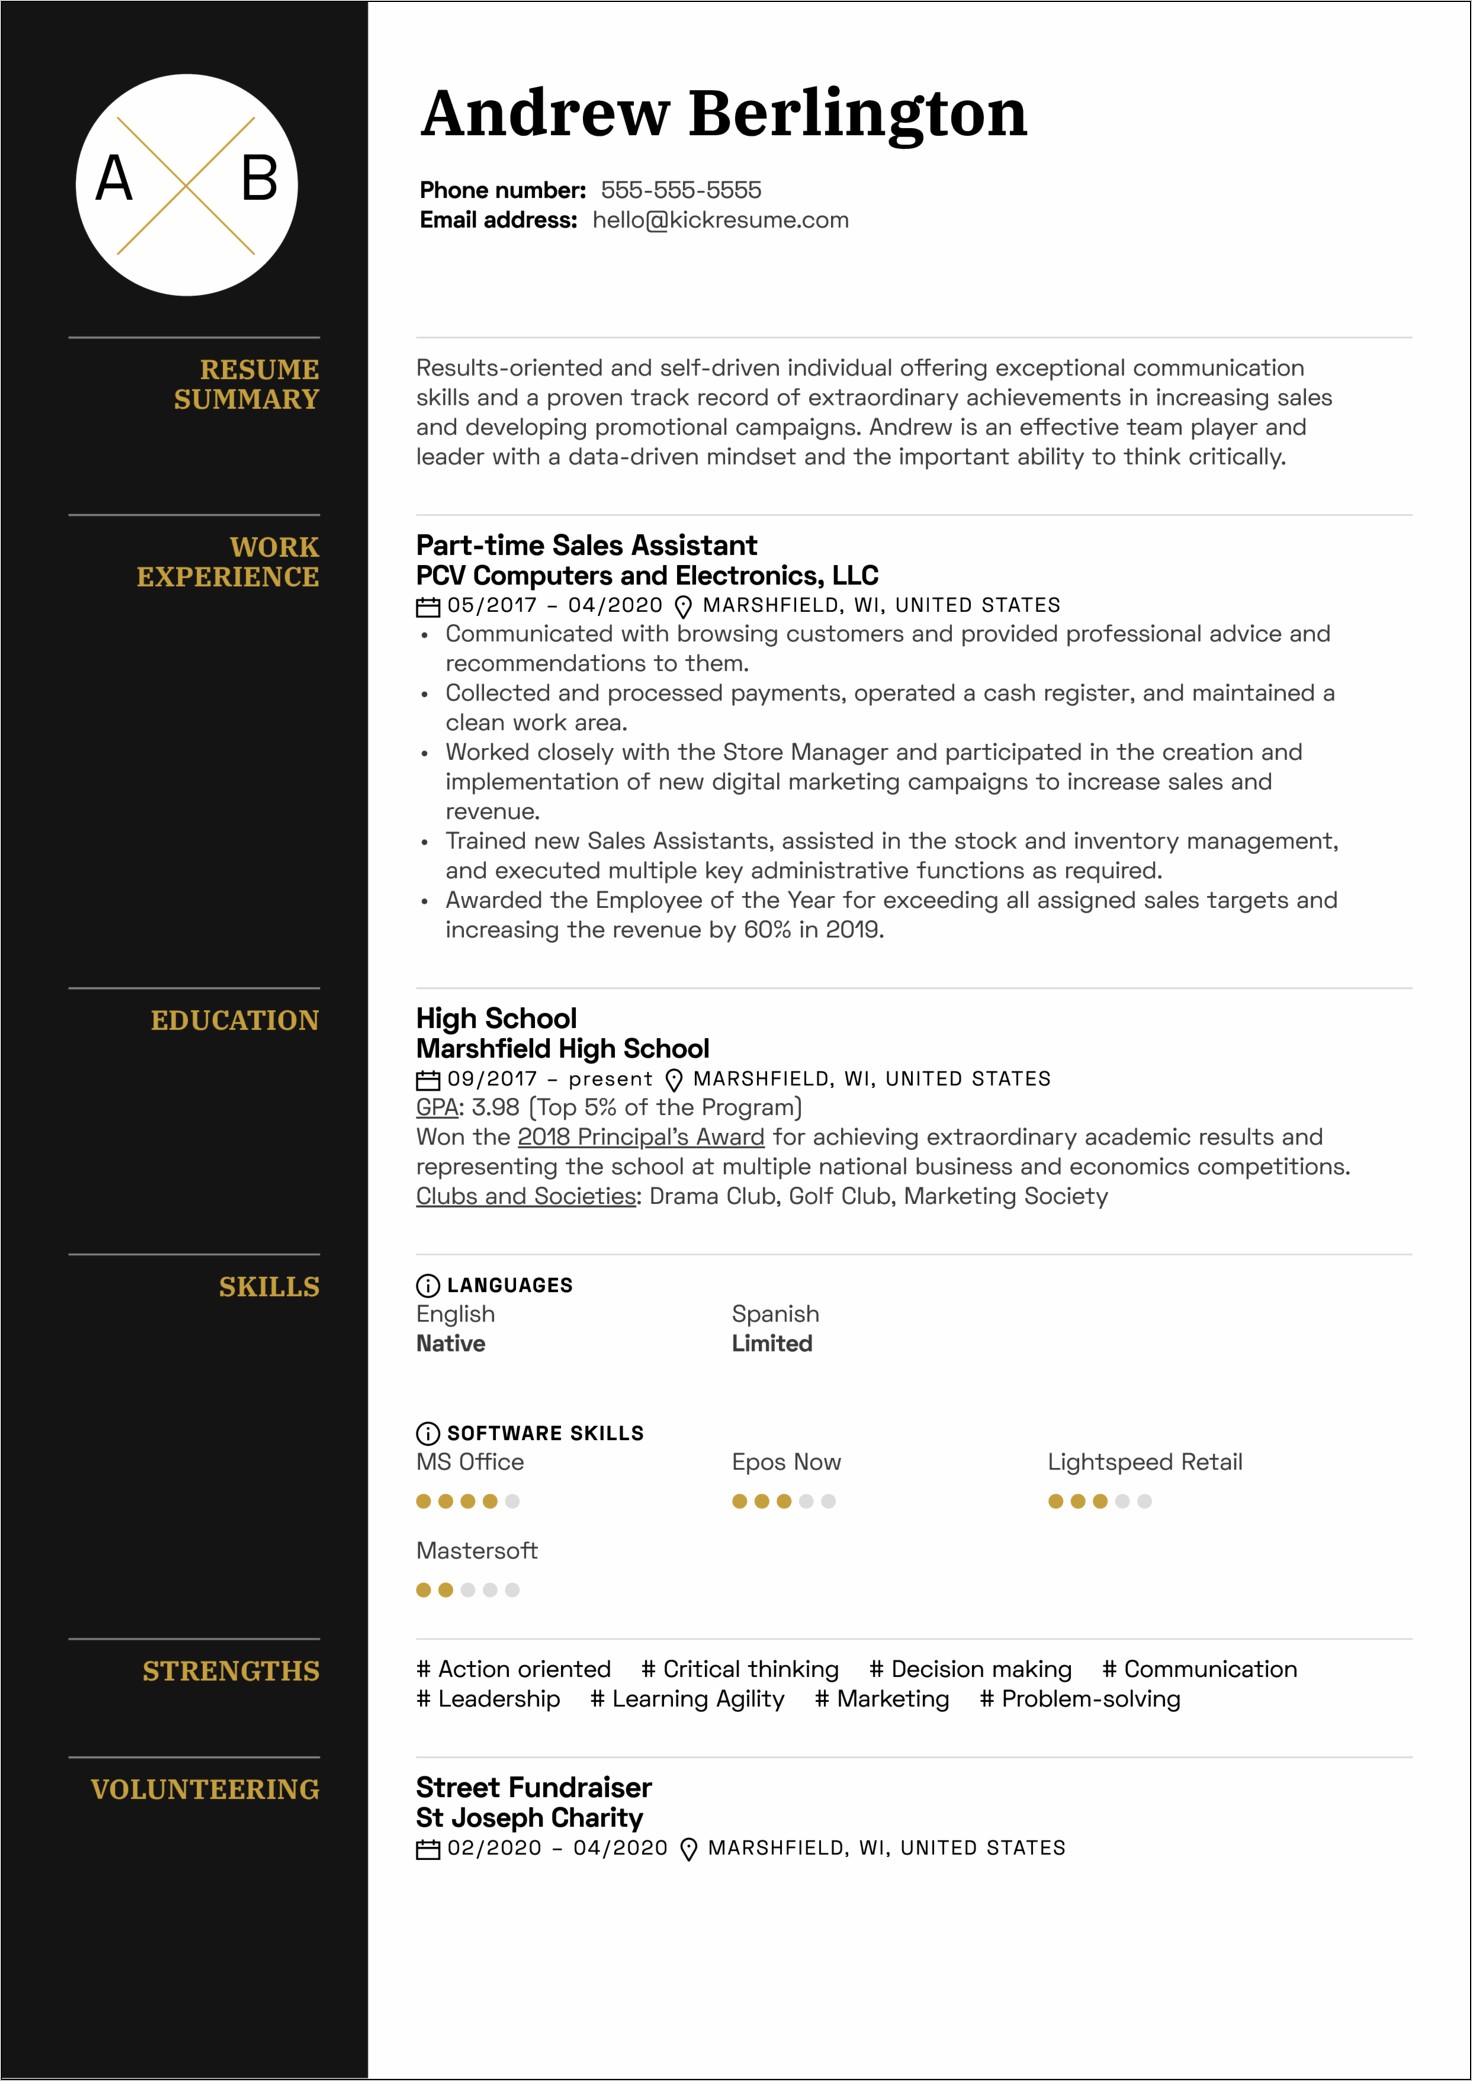 Free Resume Templates For Leader